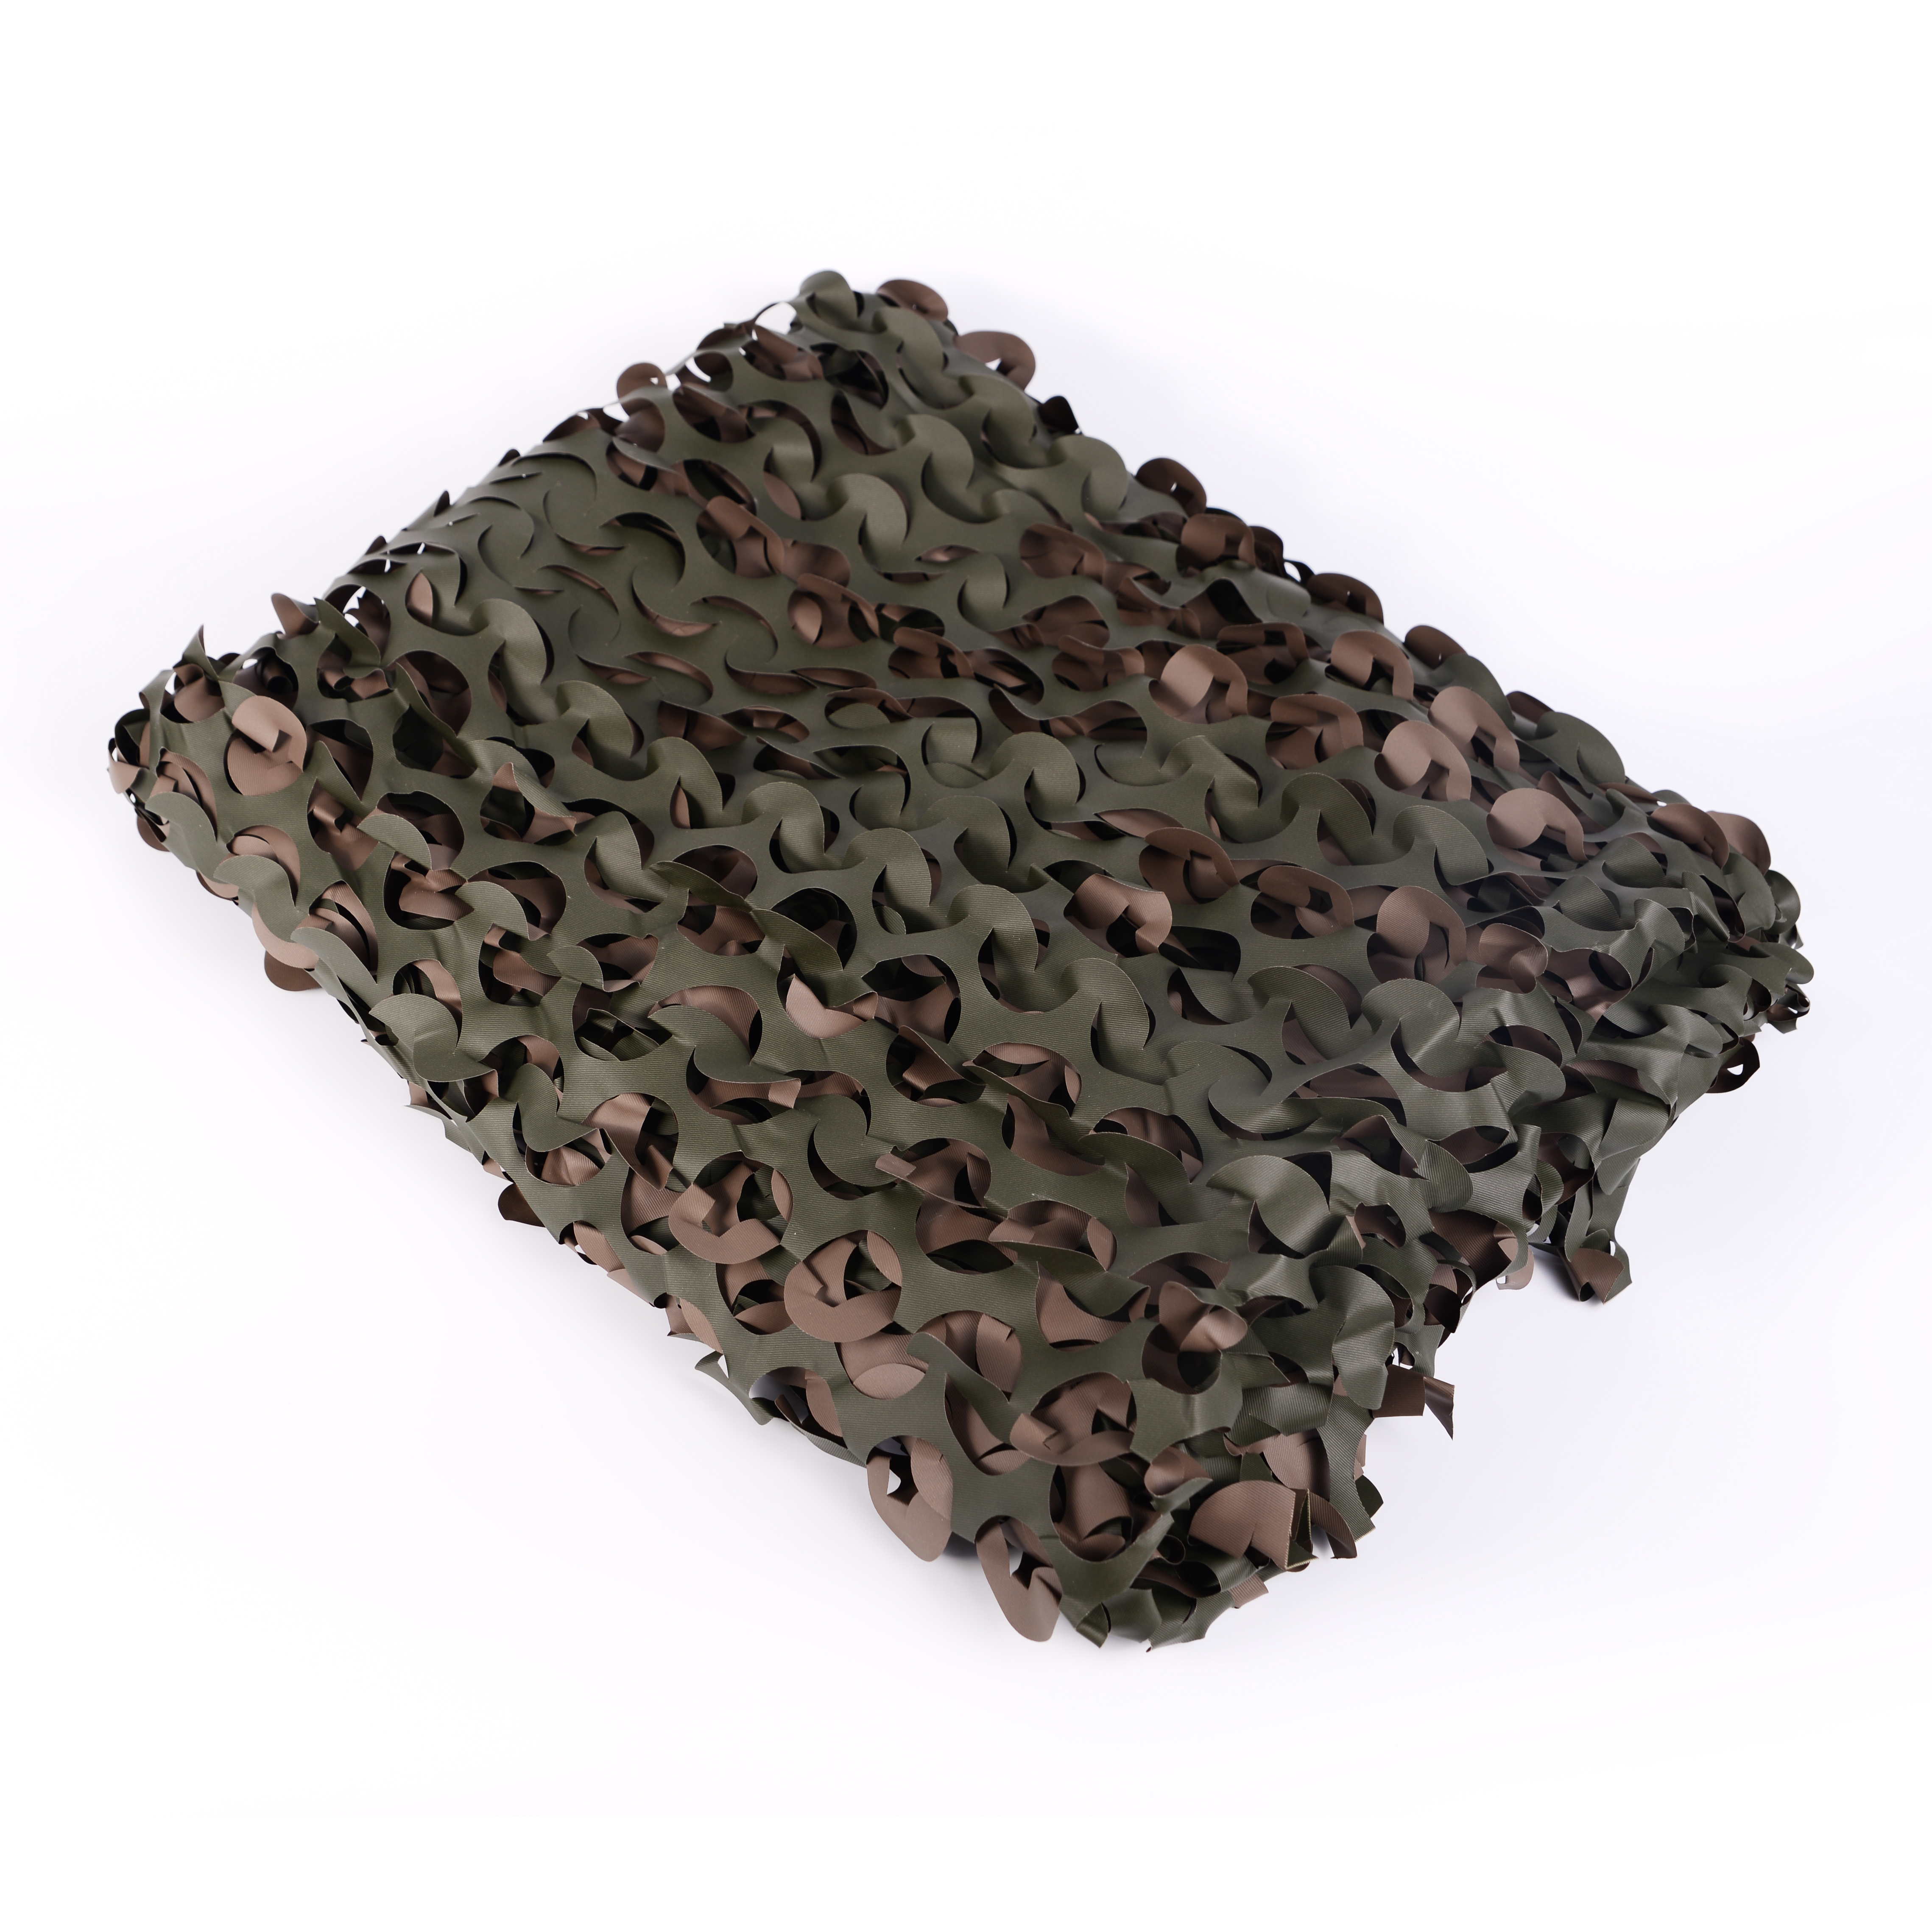 Military camouflage net, multi-purpose army camo netting.Used for military action,civil activities,indoor-outdoor decoration